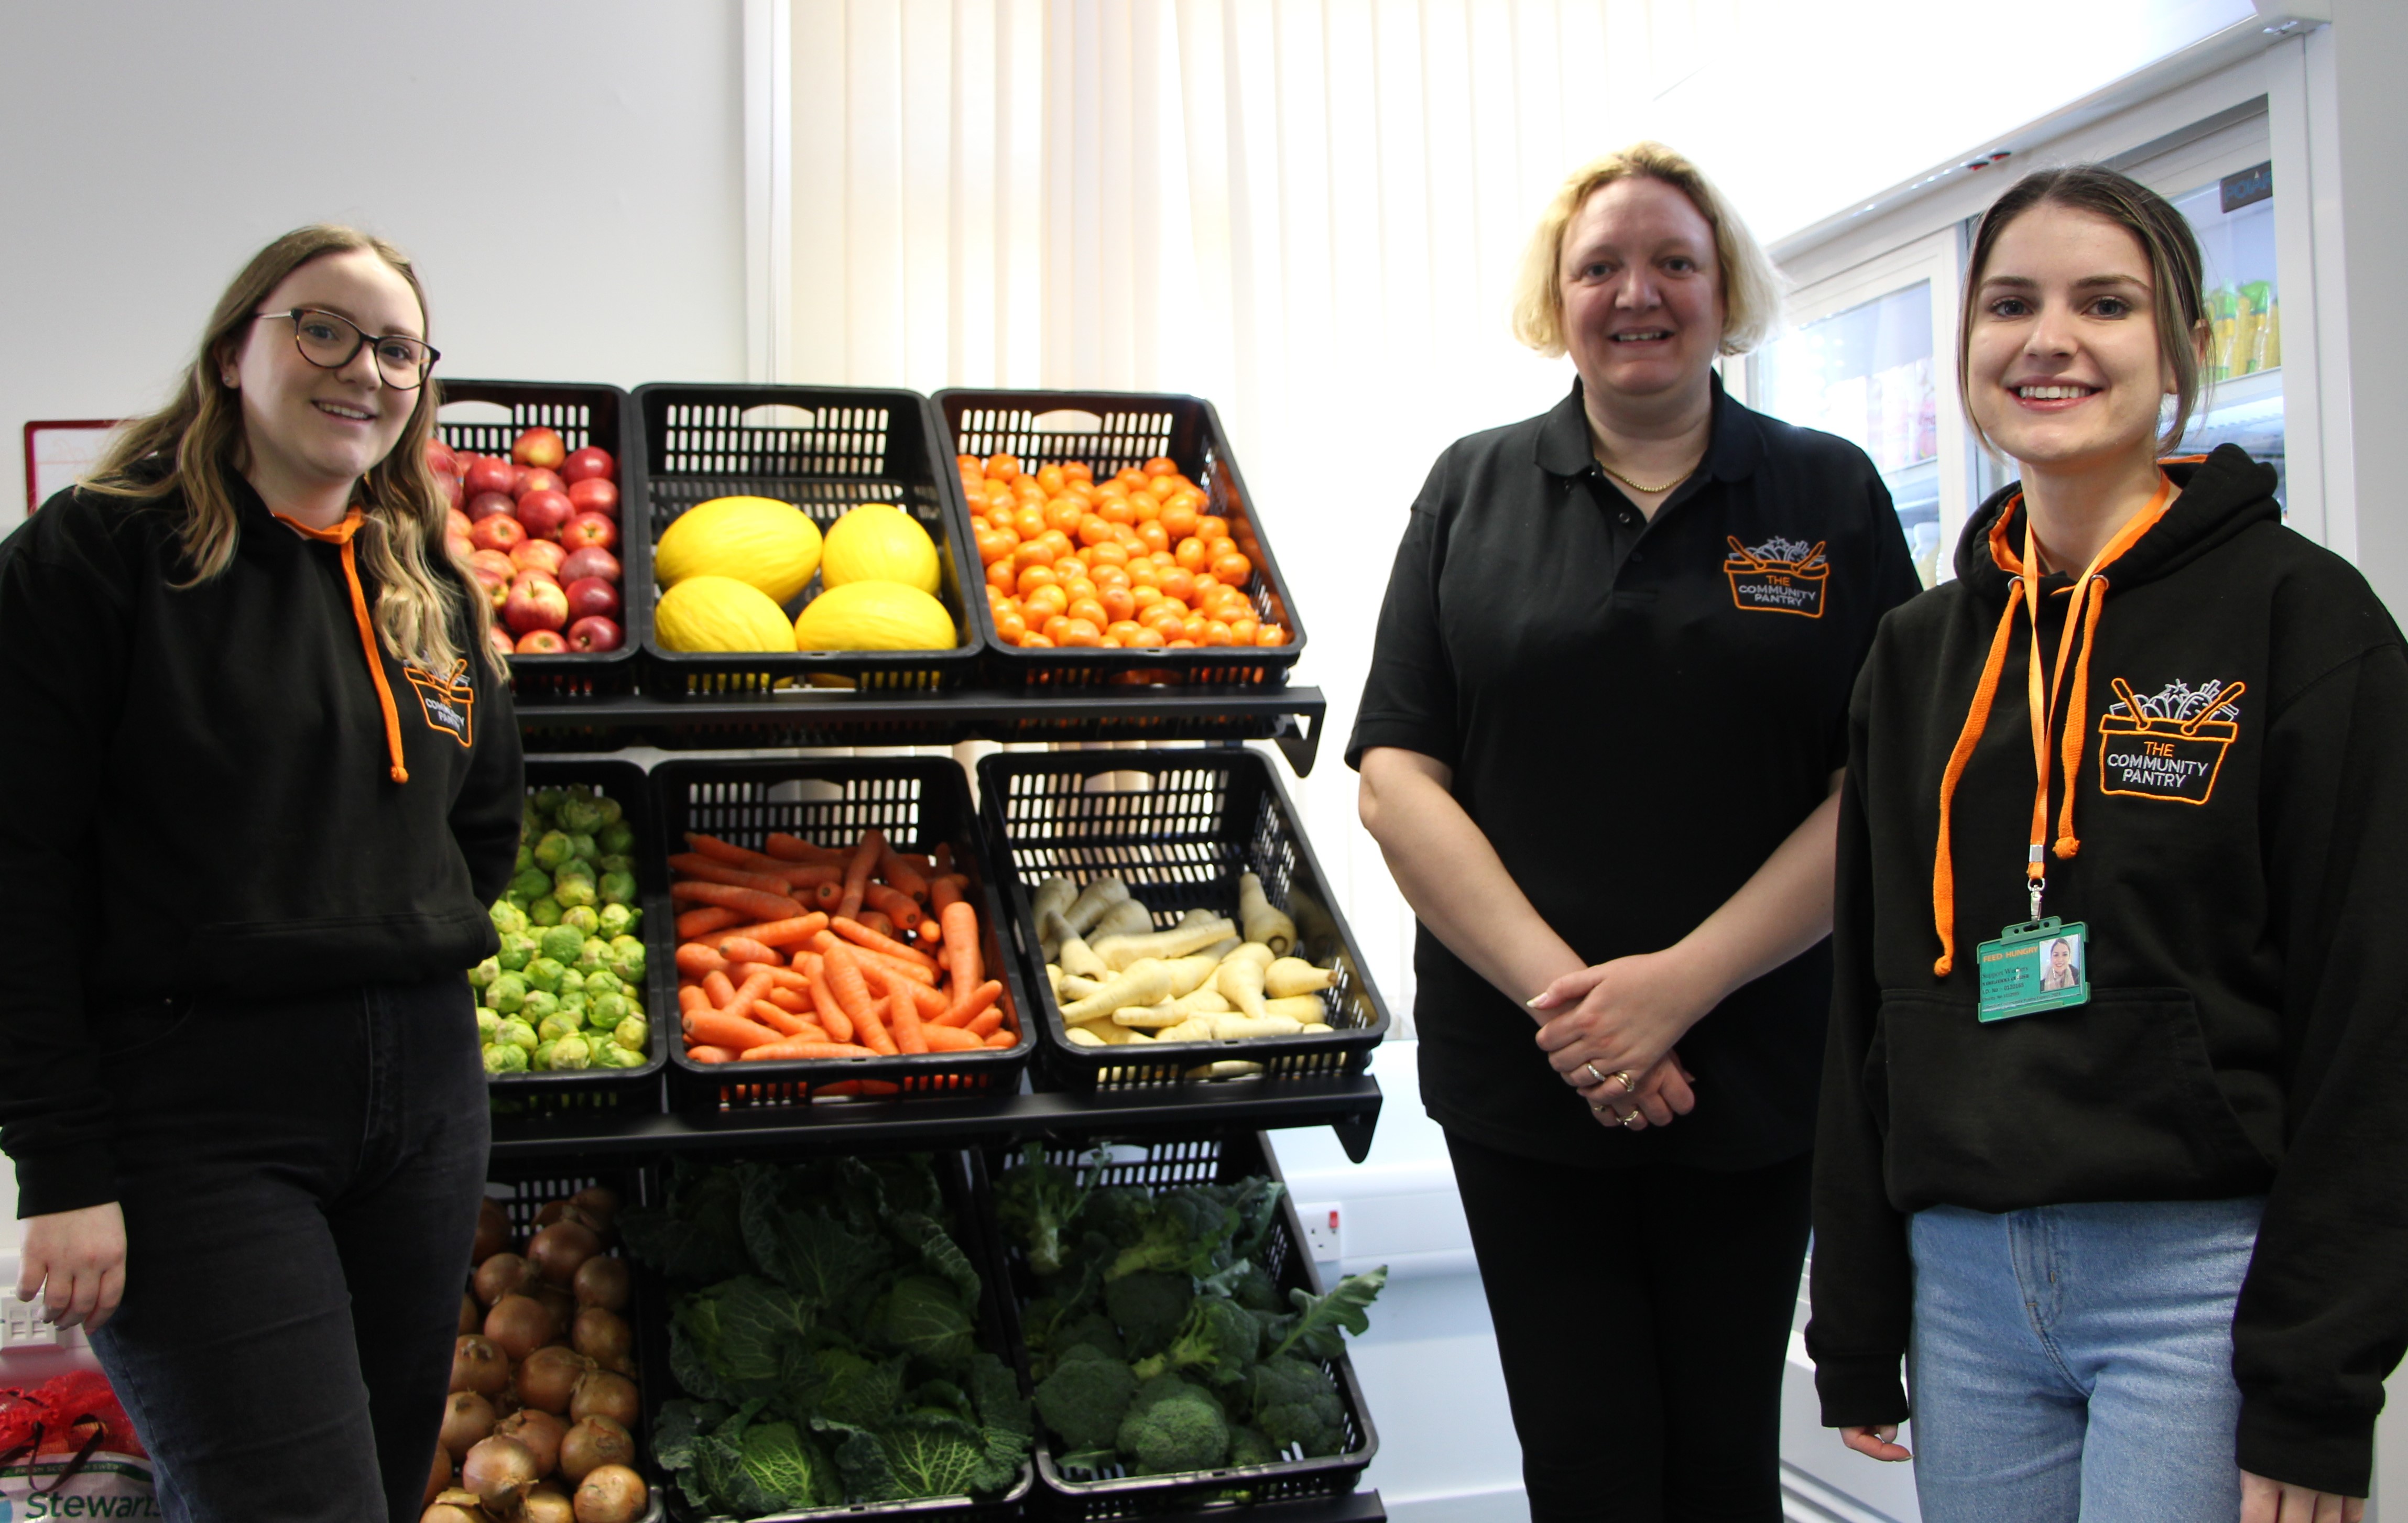 Lillington Community Pantry launches to bring together food support and advice services